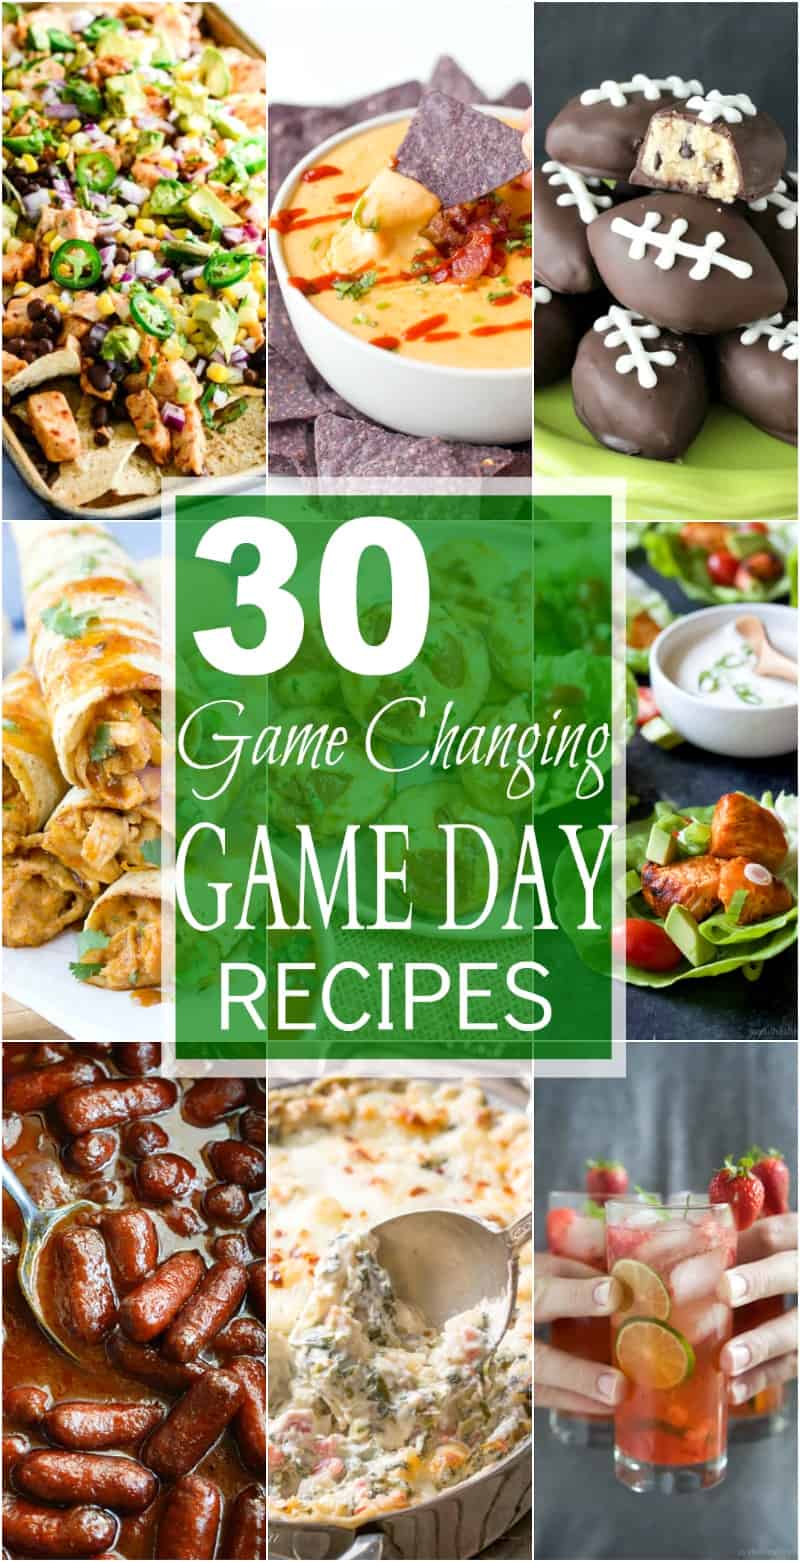 8 examples of recipes from the 30 Game Changing Game Day Recipes collection